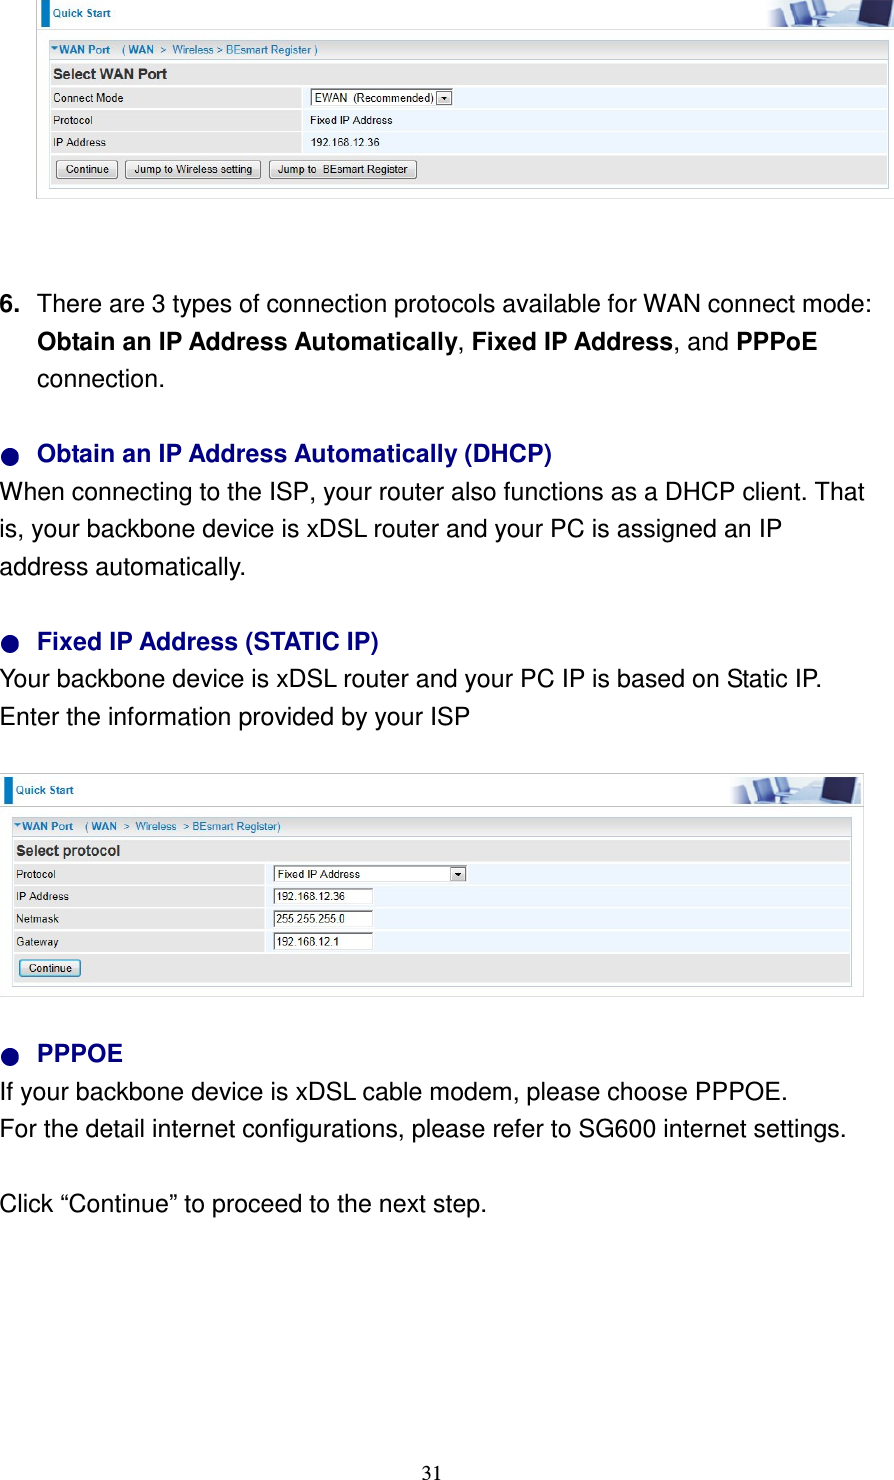   31   6.  There are 3 types of connection protocols available for WAN connect mode: Obtain an IP Address Automatically, Fixed IP Address, and PPPoE connection.    Obtain an IP Address Automatically (DHCP) When connecting to the ISP, your router also functions as a DHCP client. That is, your backbone device is xDSL router and your PC is assigned an IP address automatically.    Fixed IP Address (STATIC IP)   Your backbone device is xDSL router and your PC IP is based on Static IP. Enter the information provided by your ISP          PPPOE If your backbone device is xDSL cable modem, please choose PPPOE.   For the detail internet configurations, please refer to SG600 internet settings.  Click “Continue” to proceed to the next step.        